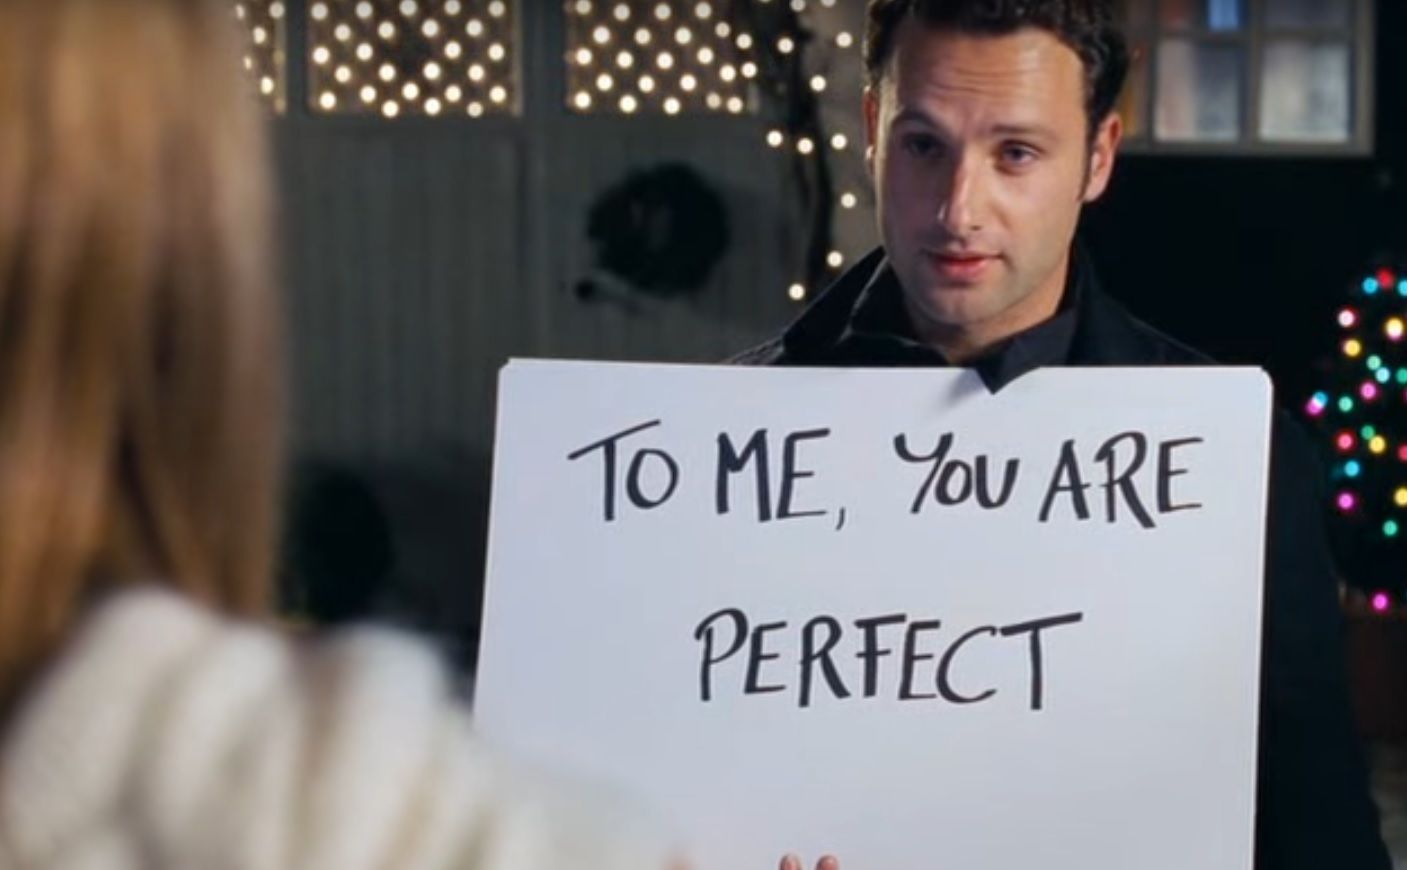 5 Classic Christmas Movie Moments That Are the Epitome of True Romance